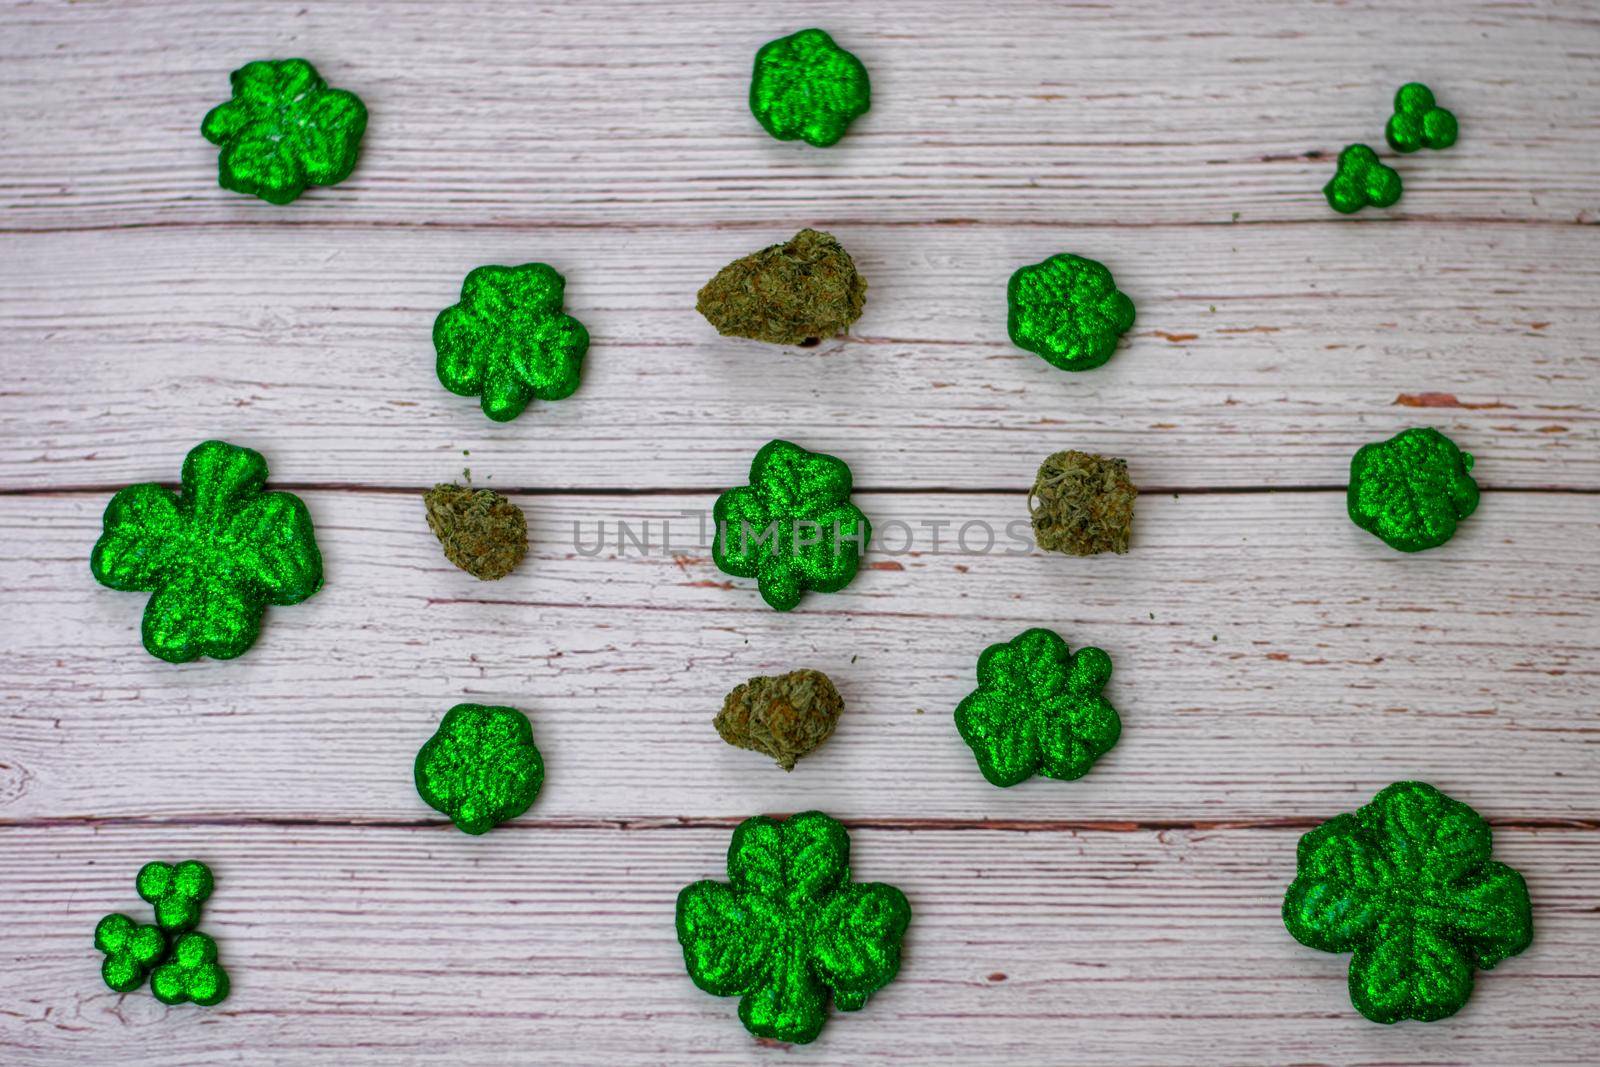 Glitter Covered Four Leaf Clovers and Cannabis Nugs in a Pattern on a White Wood Background by bju12290